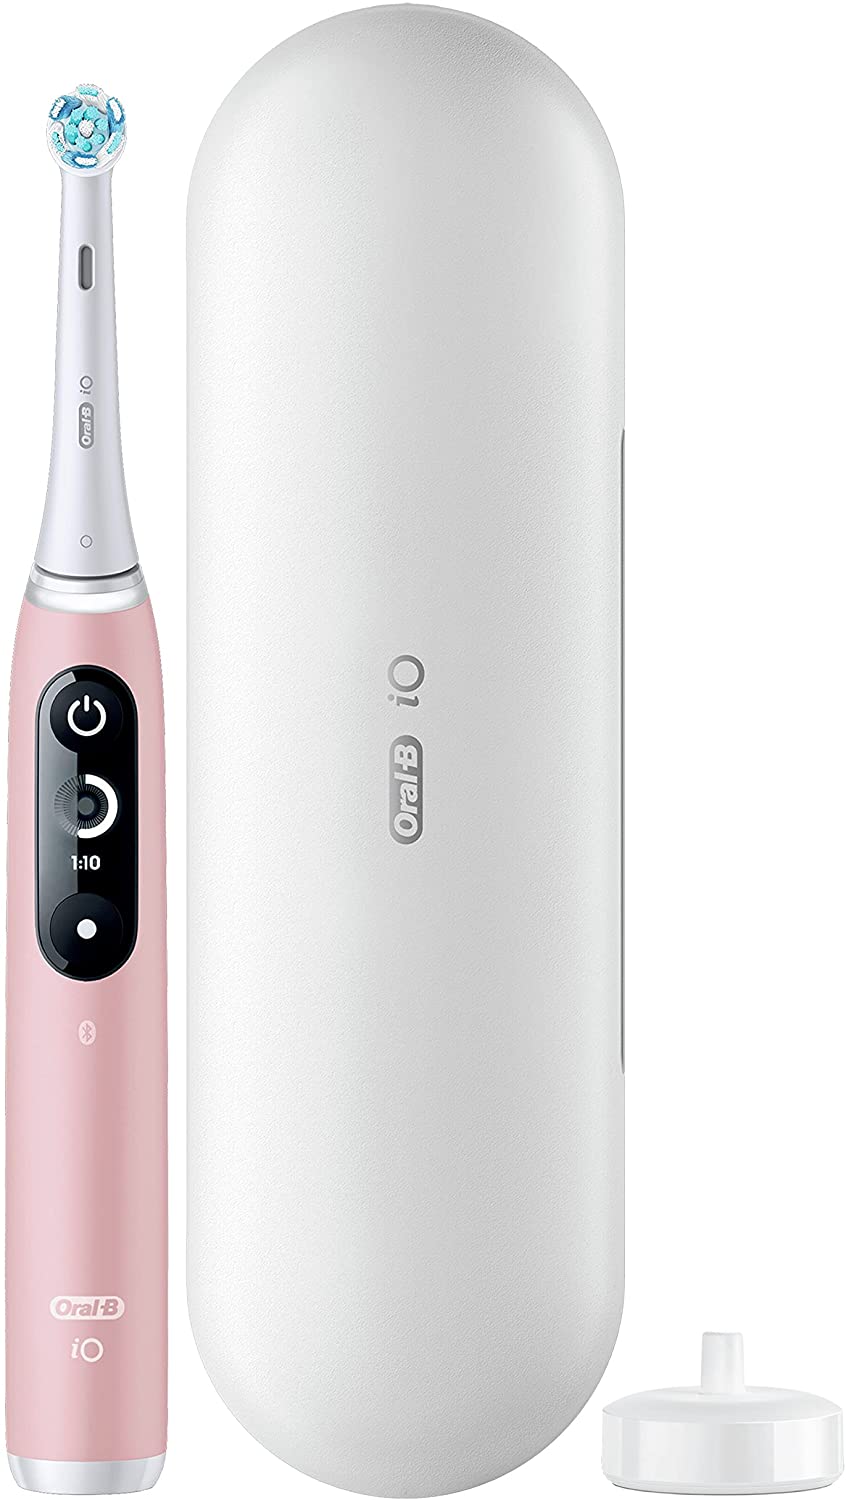 Oral-B Power iO Series 6 Electric Rechargeable Toothbrush with (1) Brush Head, Pink Sand